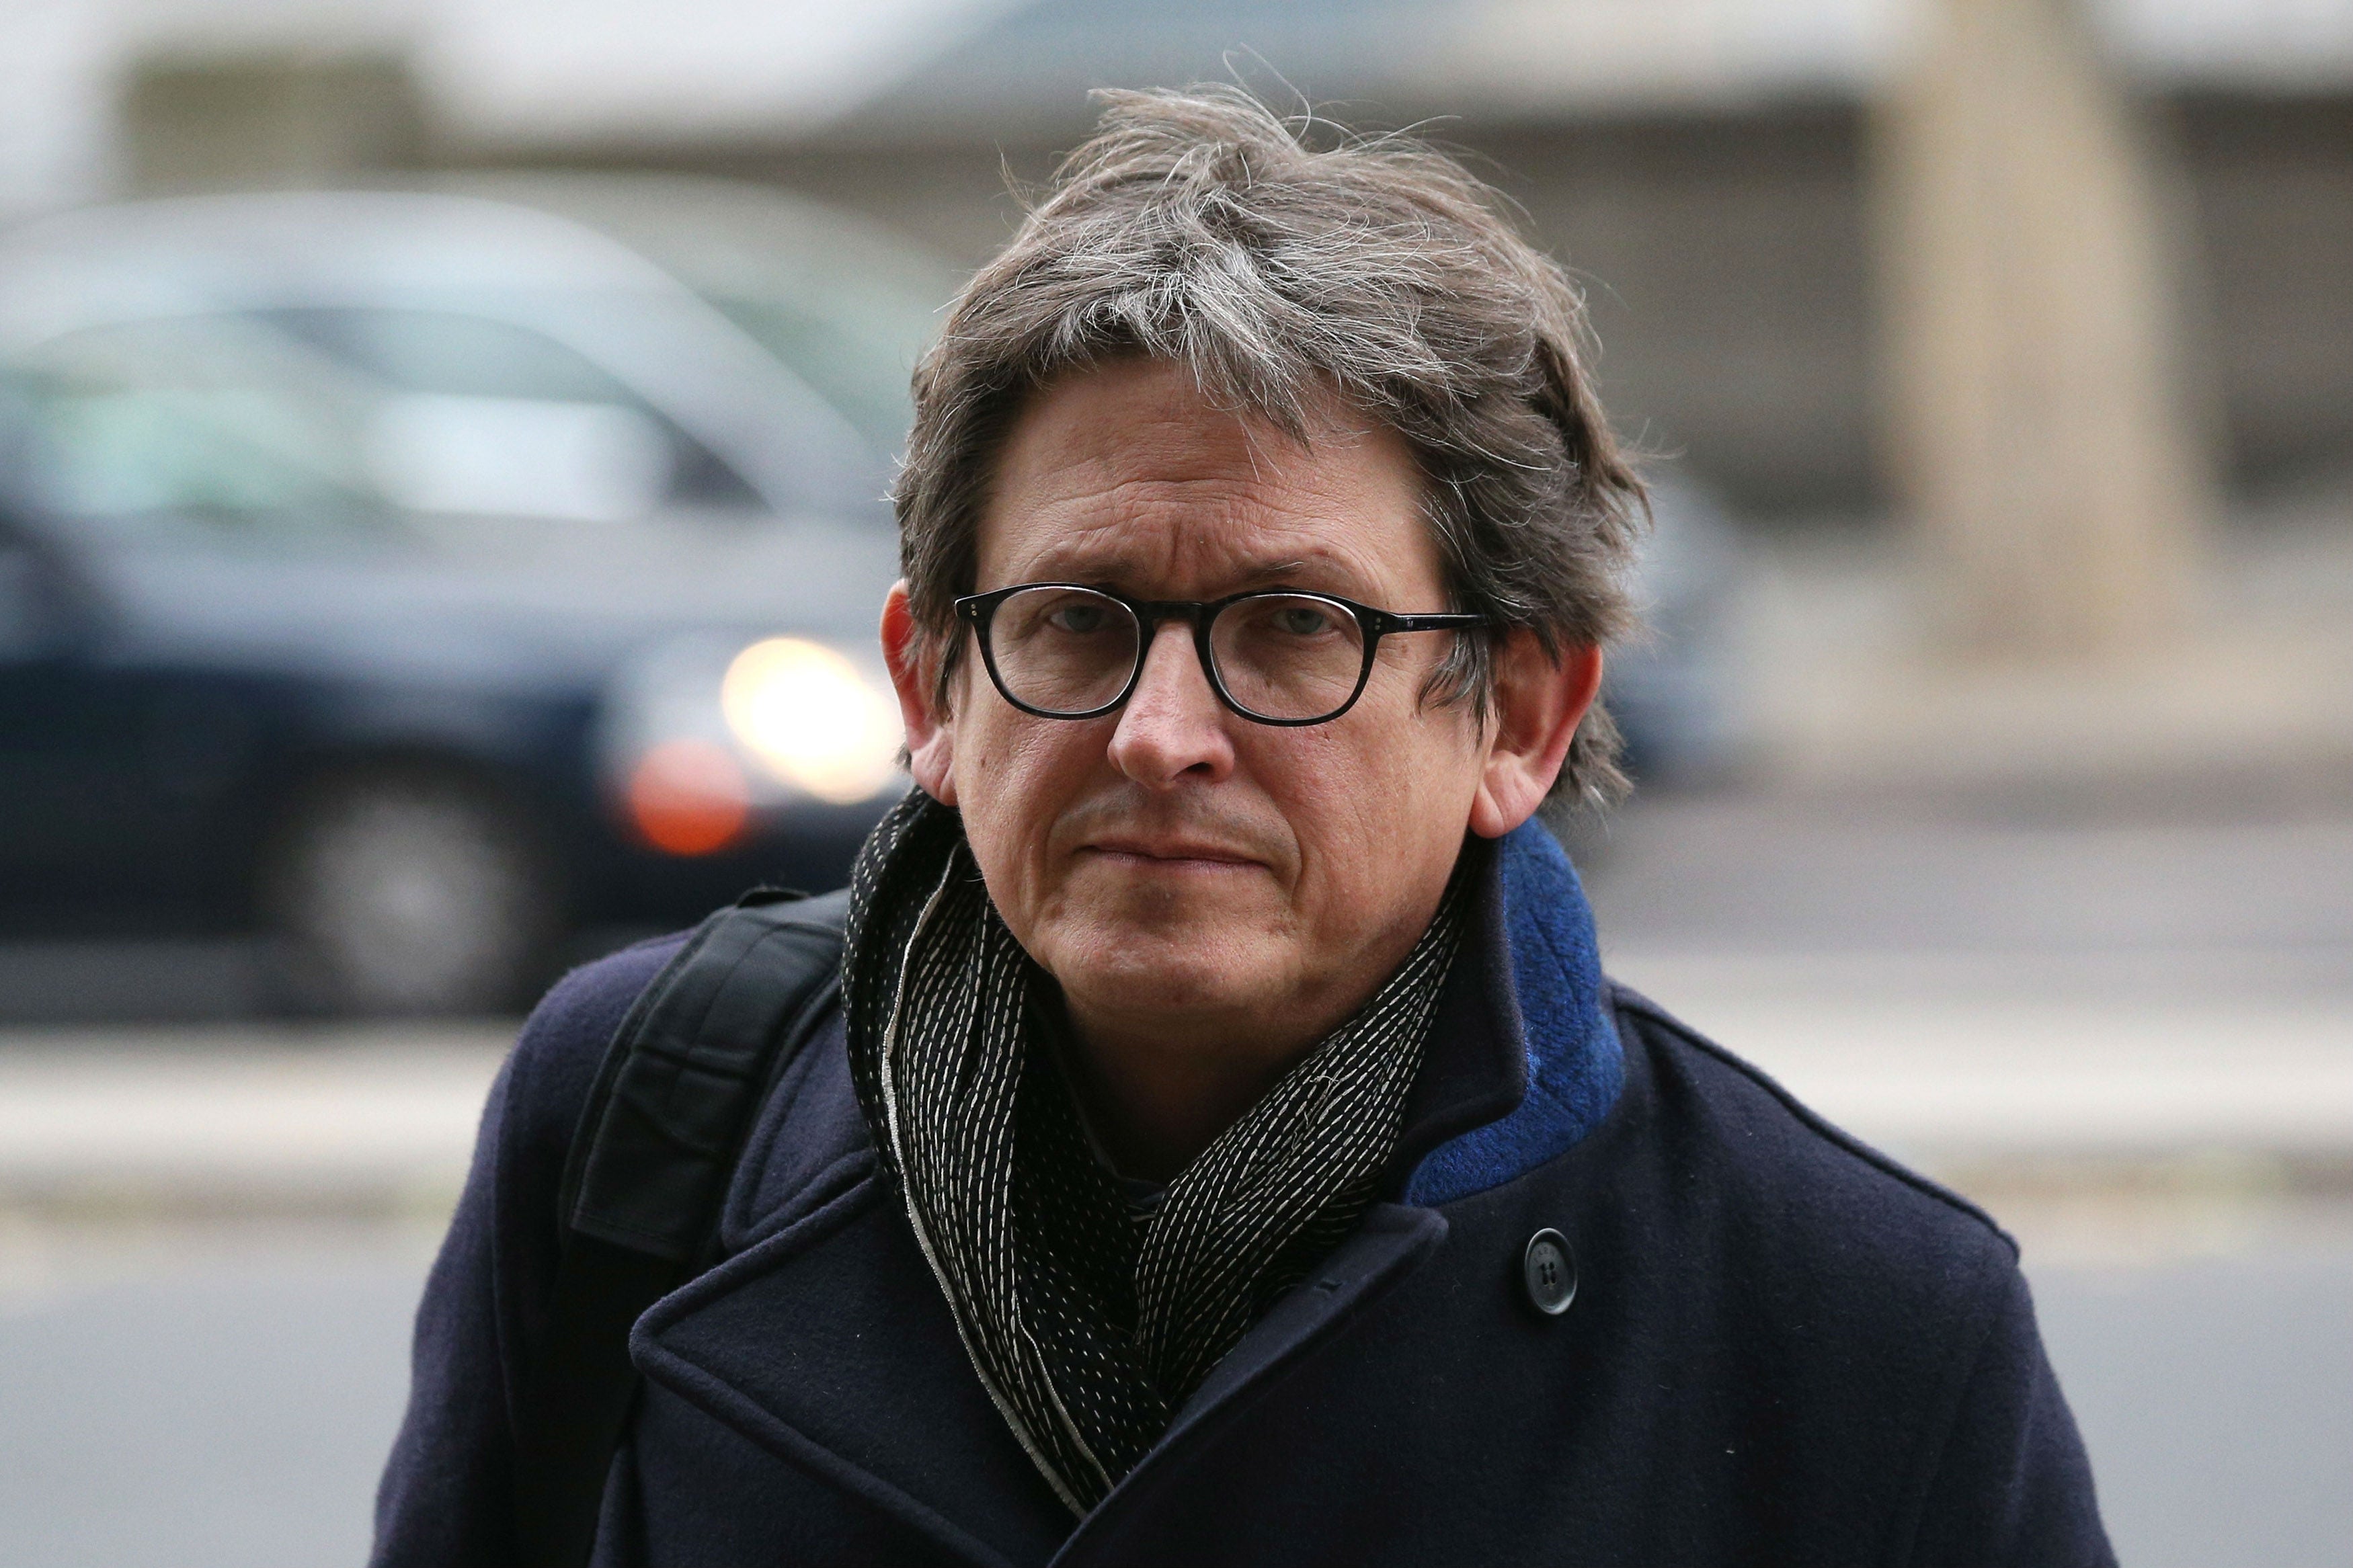 ‘It is dangerous that they are trying to pick him off,’ Alan Rusbridger tells The Independent